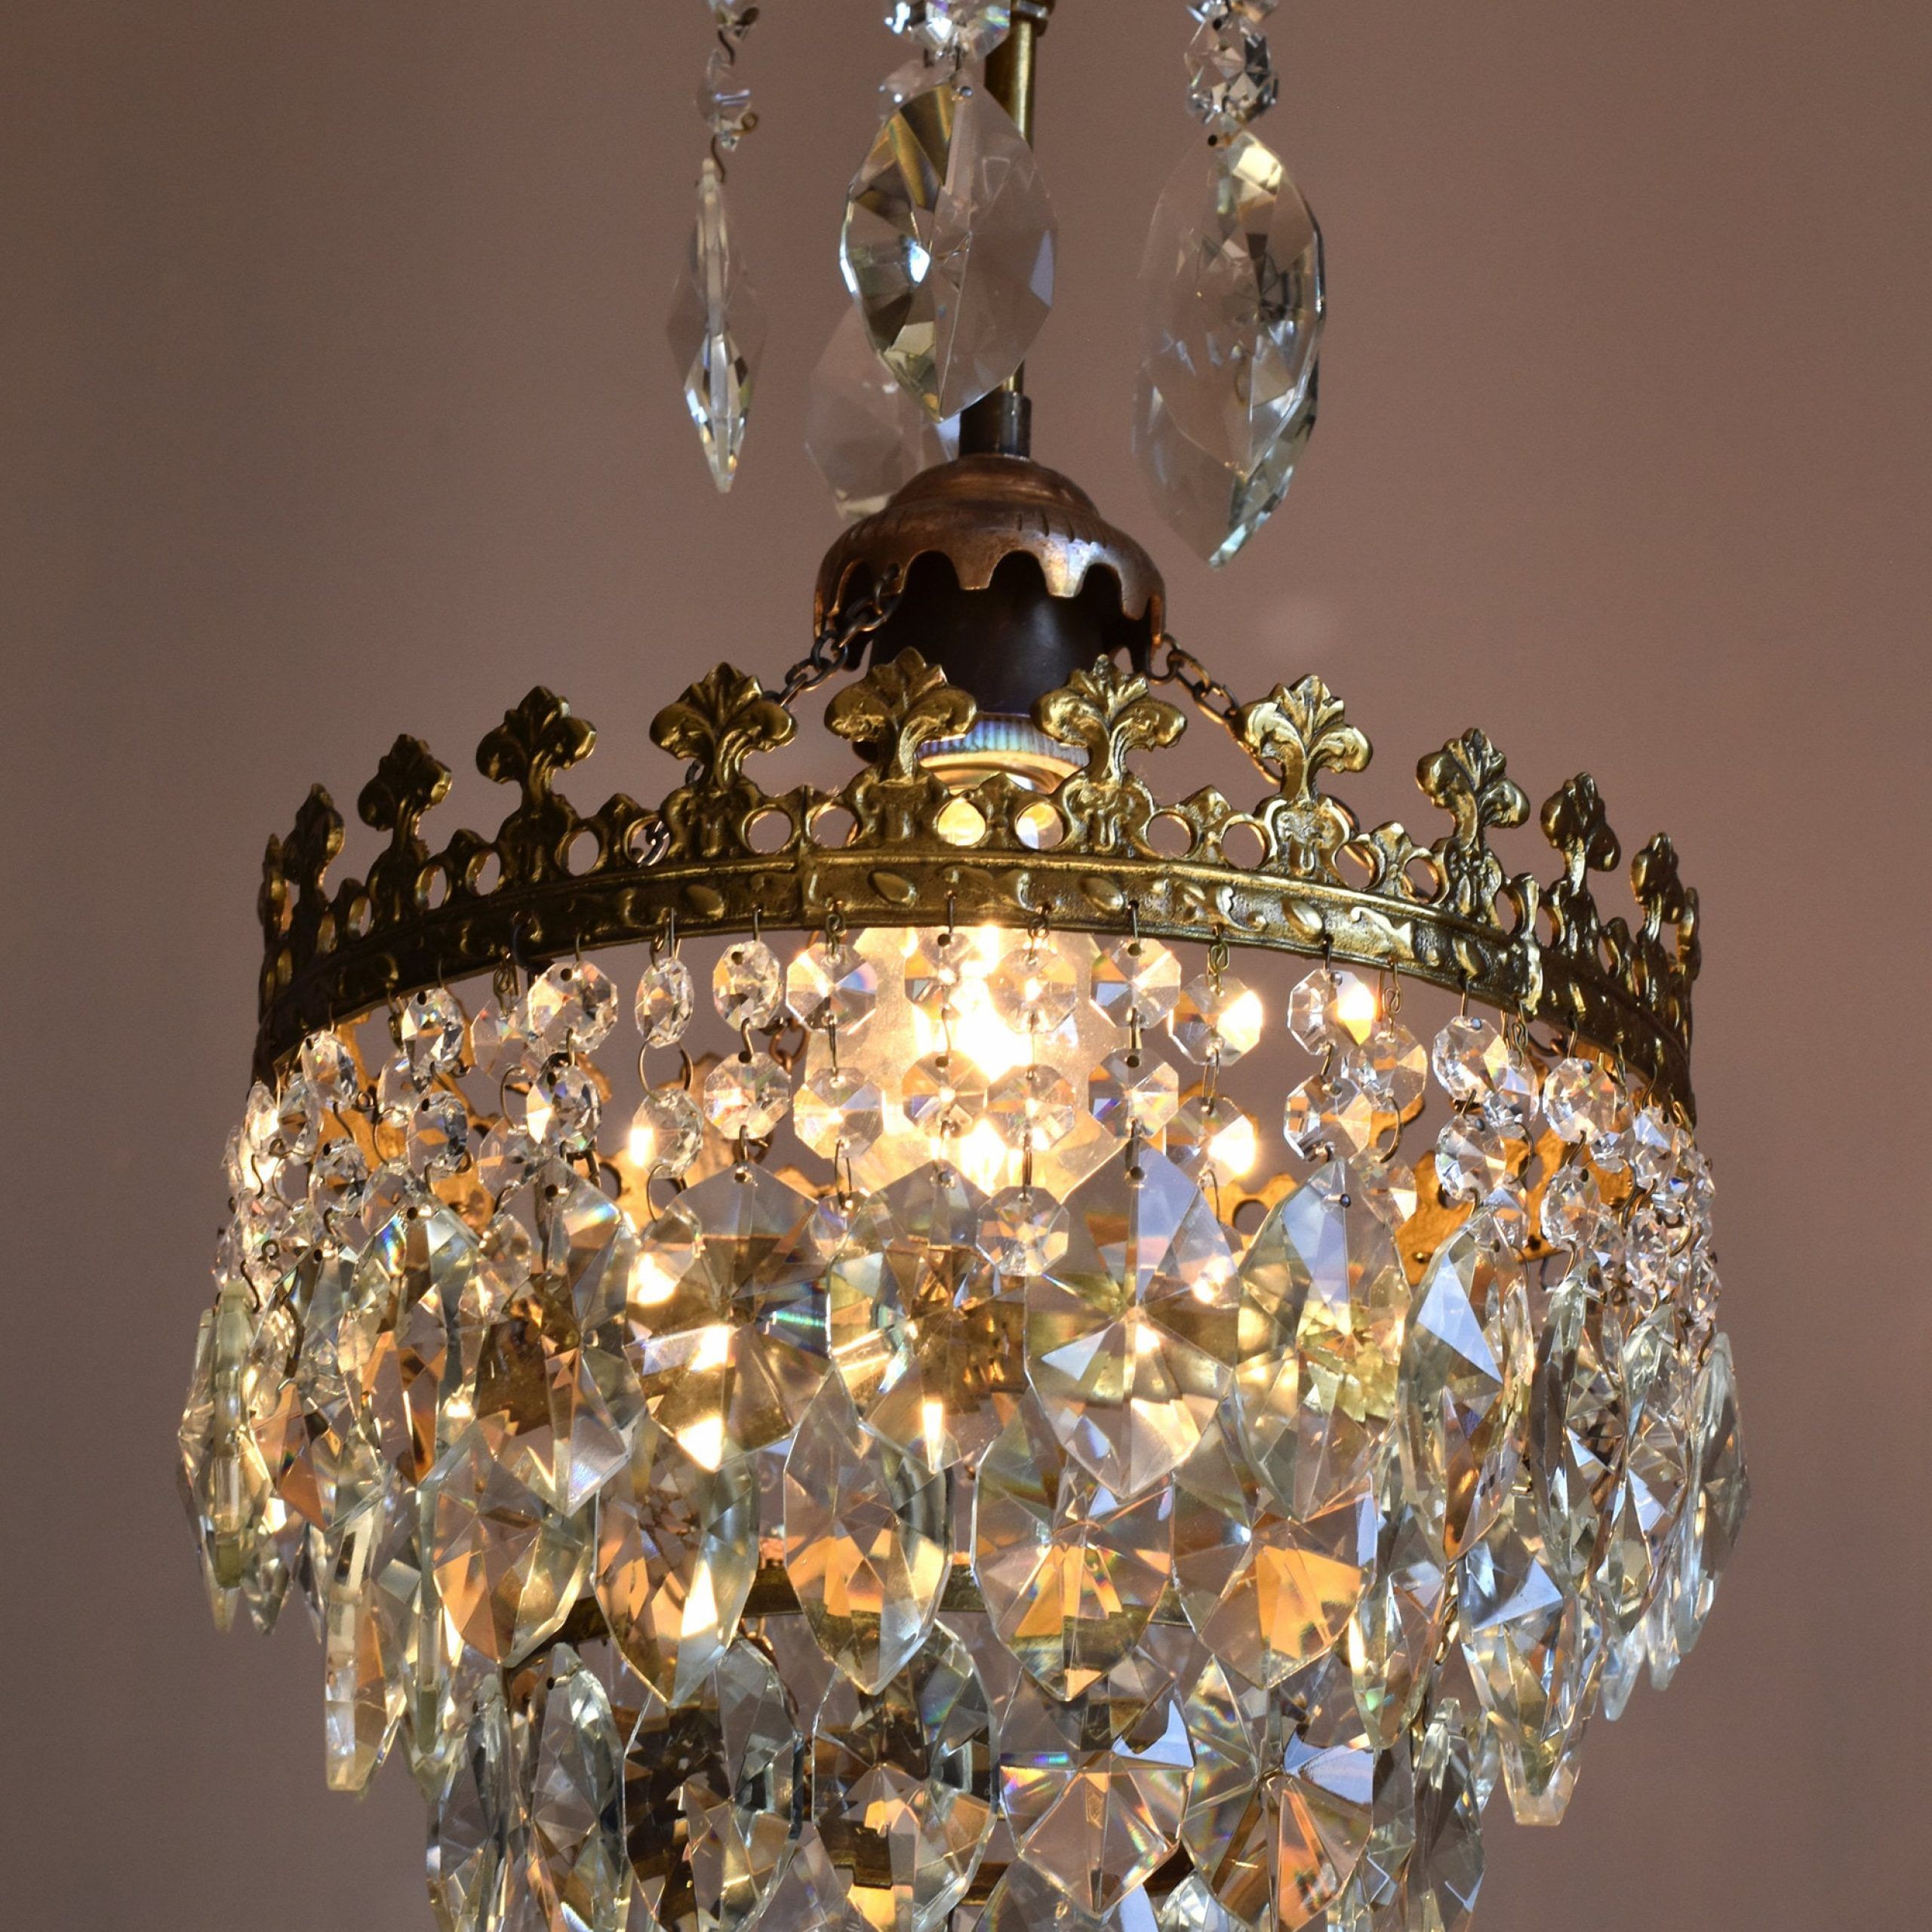 Antique & Vintage Brass Crystal Chandelier, Petite Ceiling In Current Antique Brass Crystal Chandeliers (View 5 of 20)